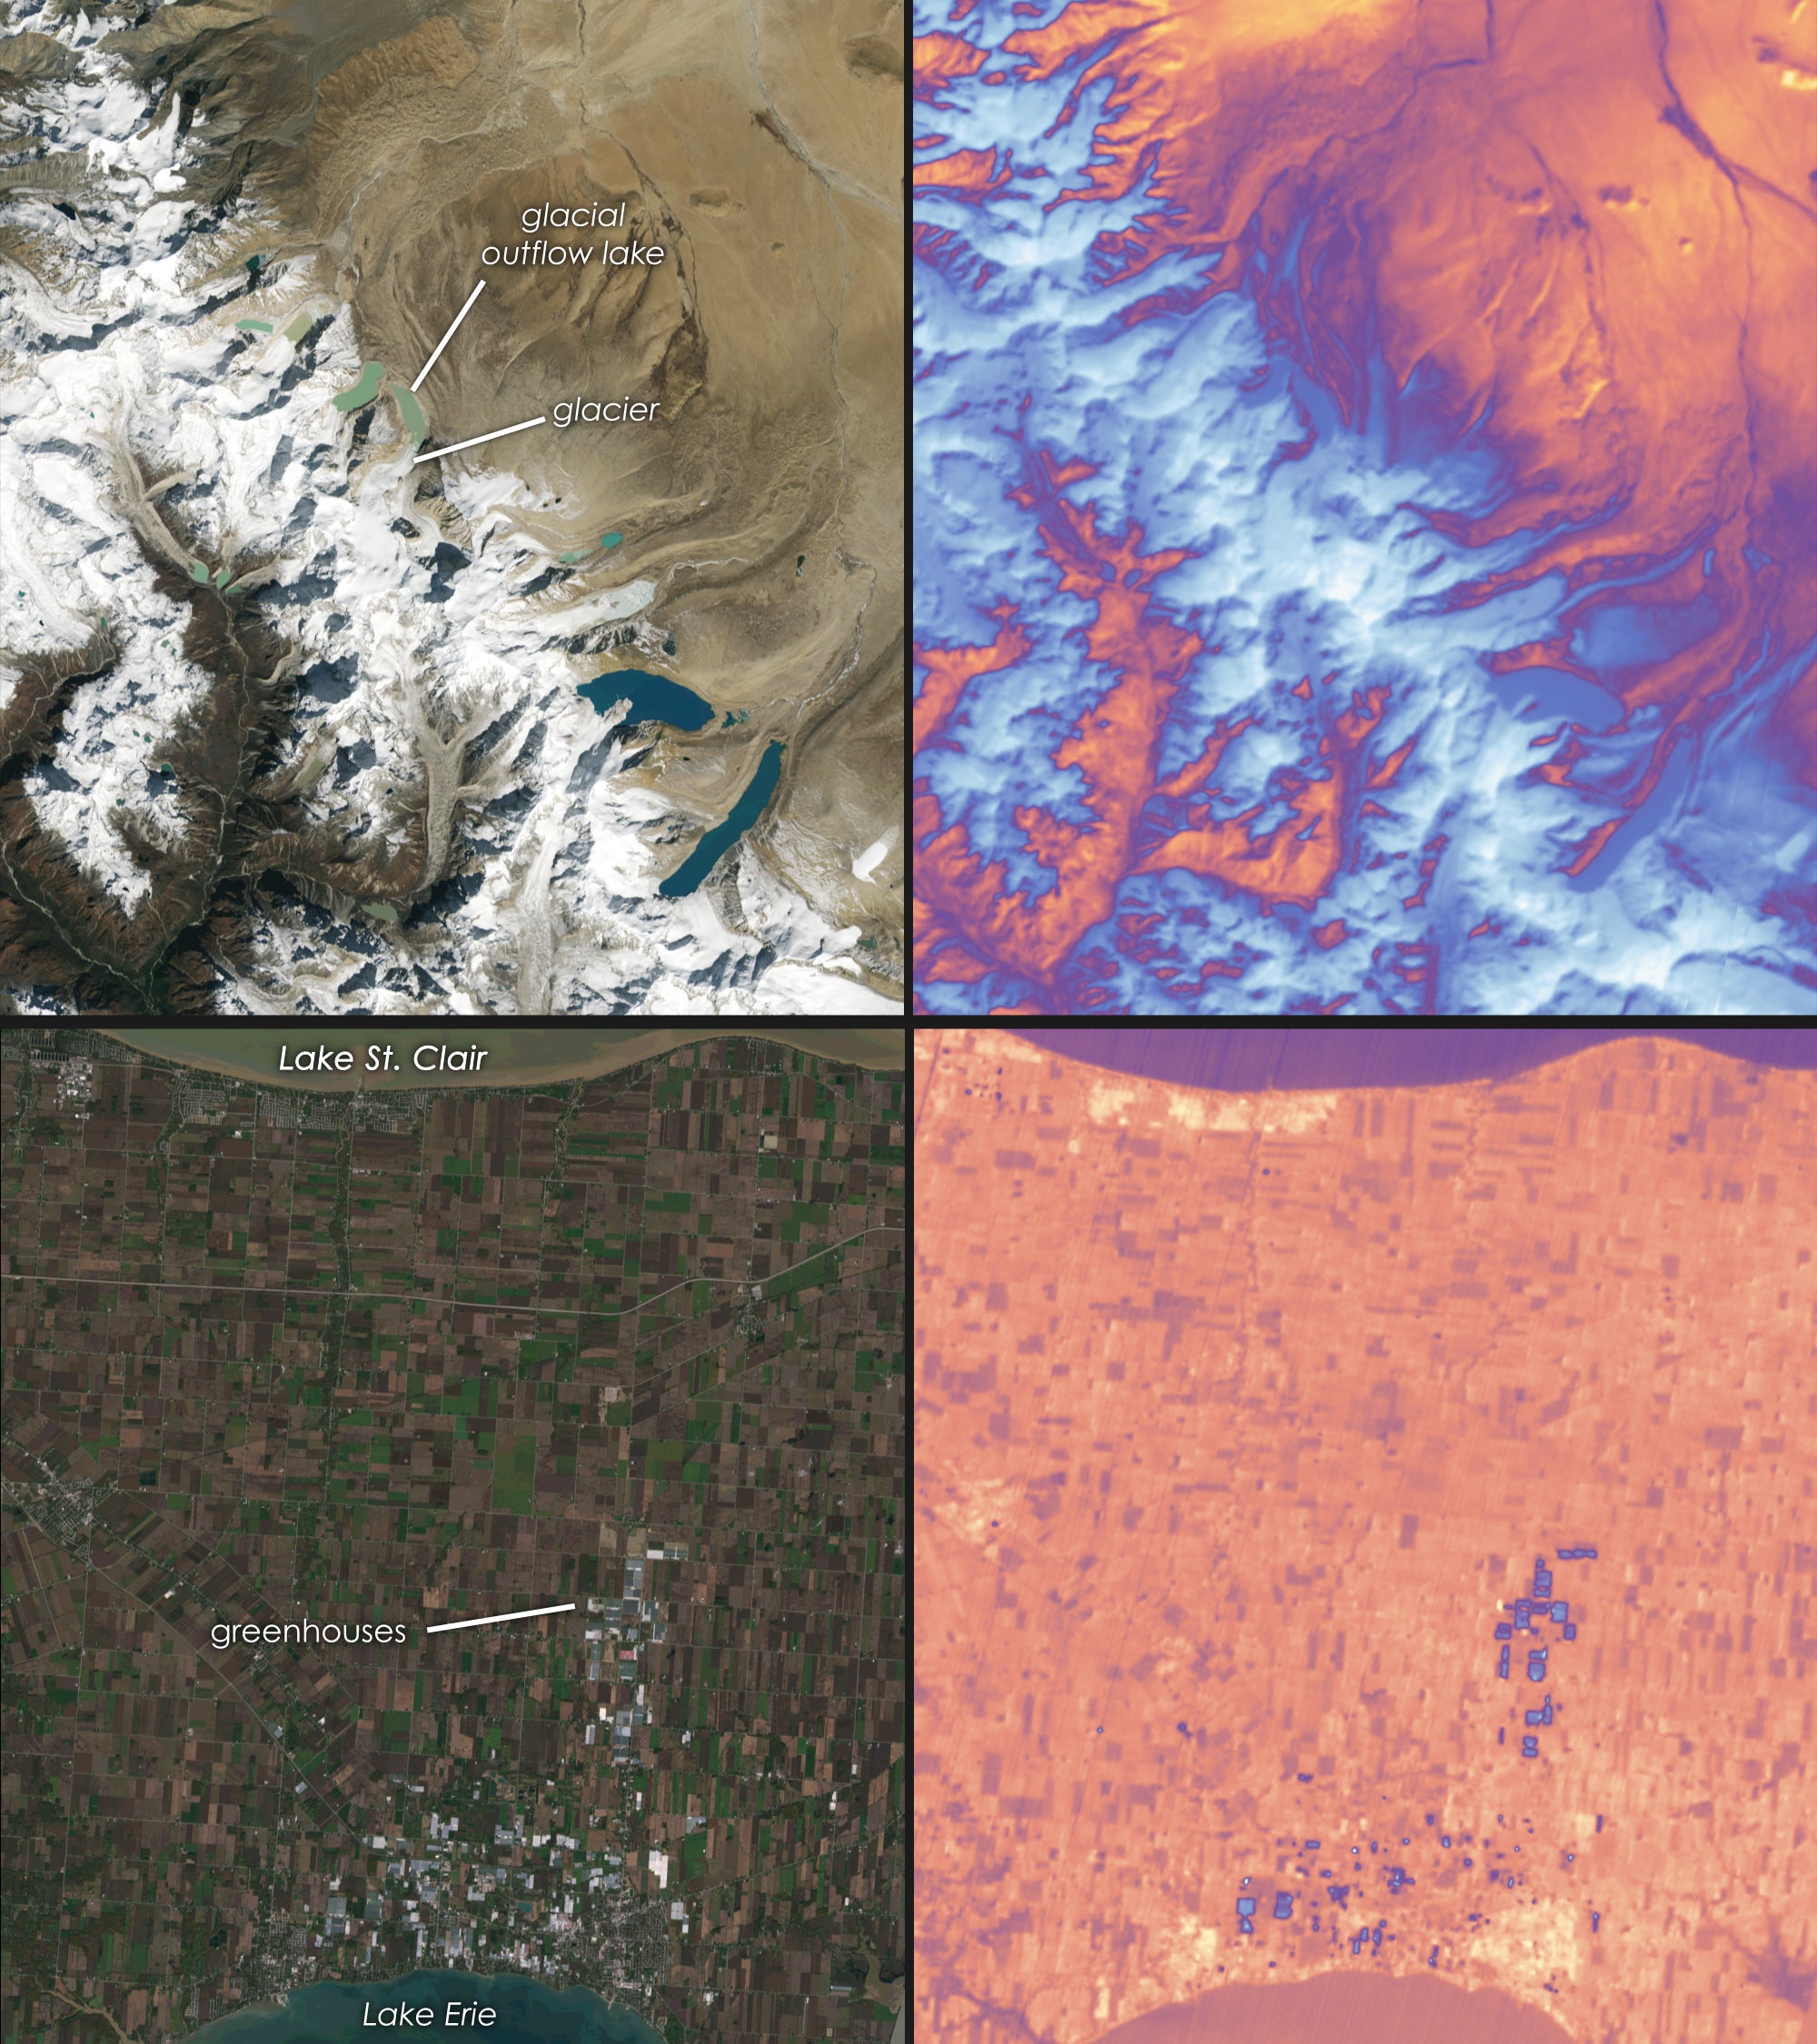 <p>Images from Landsat 9 show Ontario and the Himalayas in both natural color and thermal wavelengths</p>